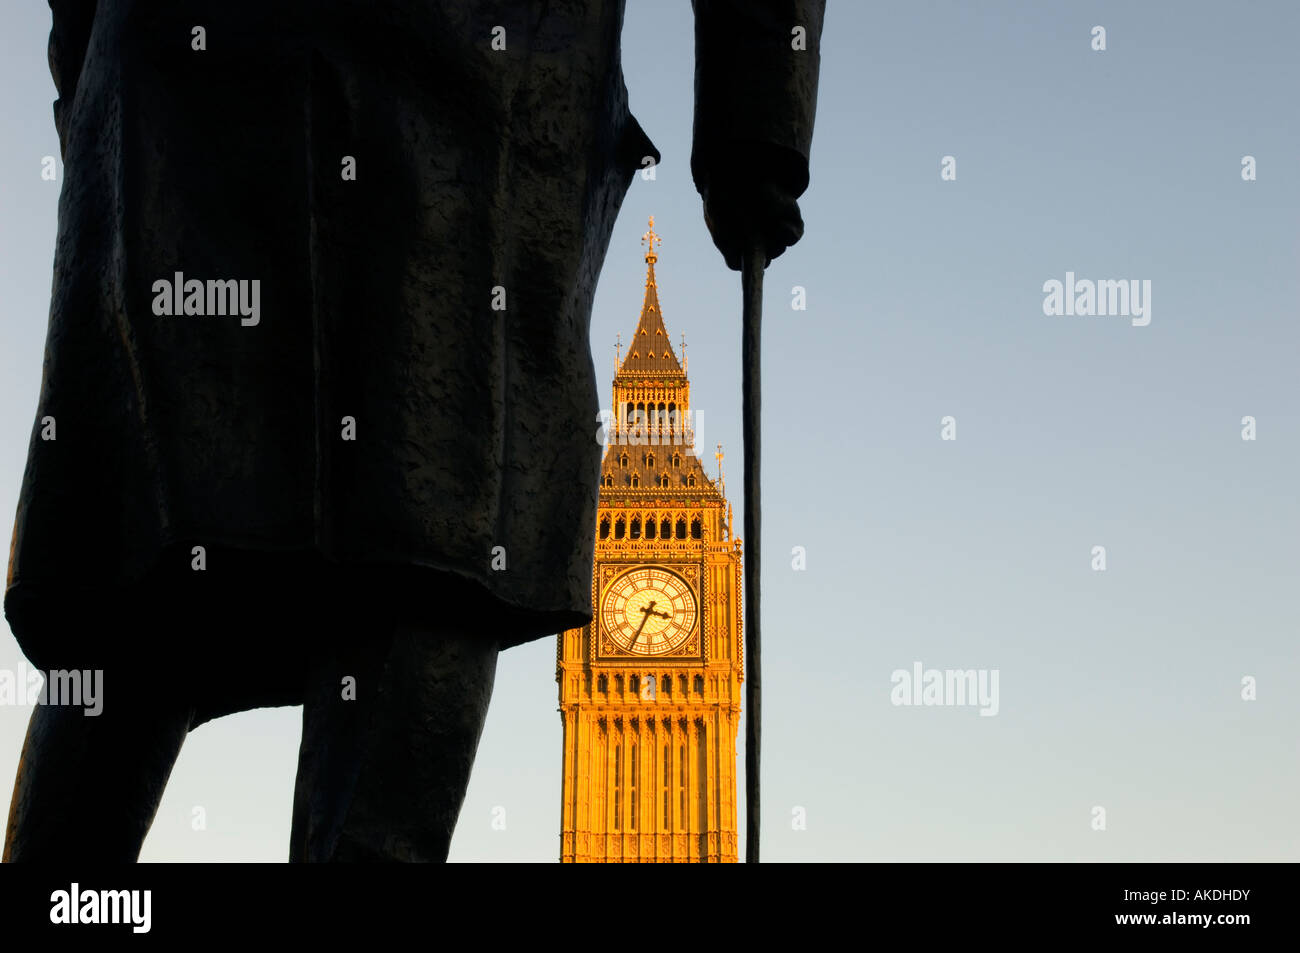 Statue of Sir Winston Churchill on Parliament Square and clock tower of Houses of Parliament Big Ben London United Kingdom Stock Photo